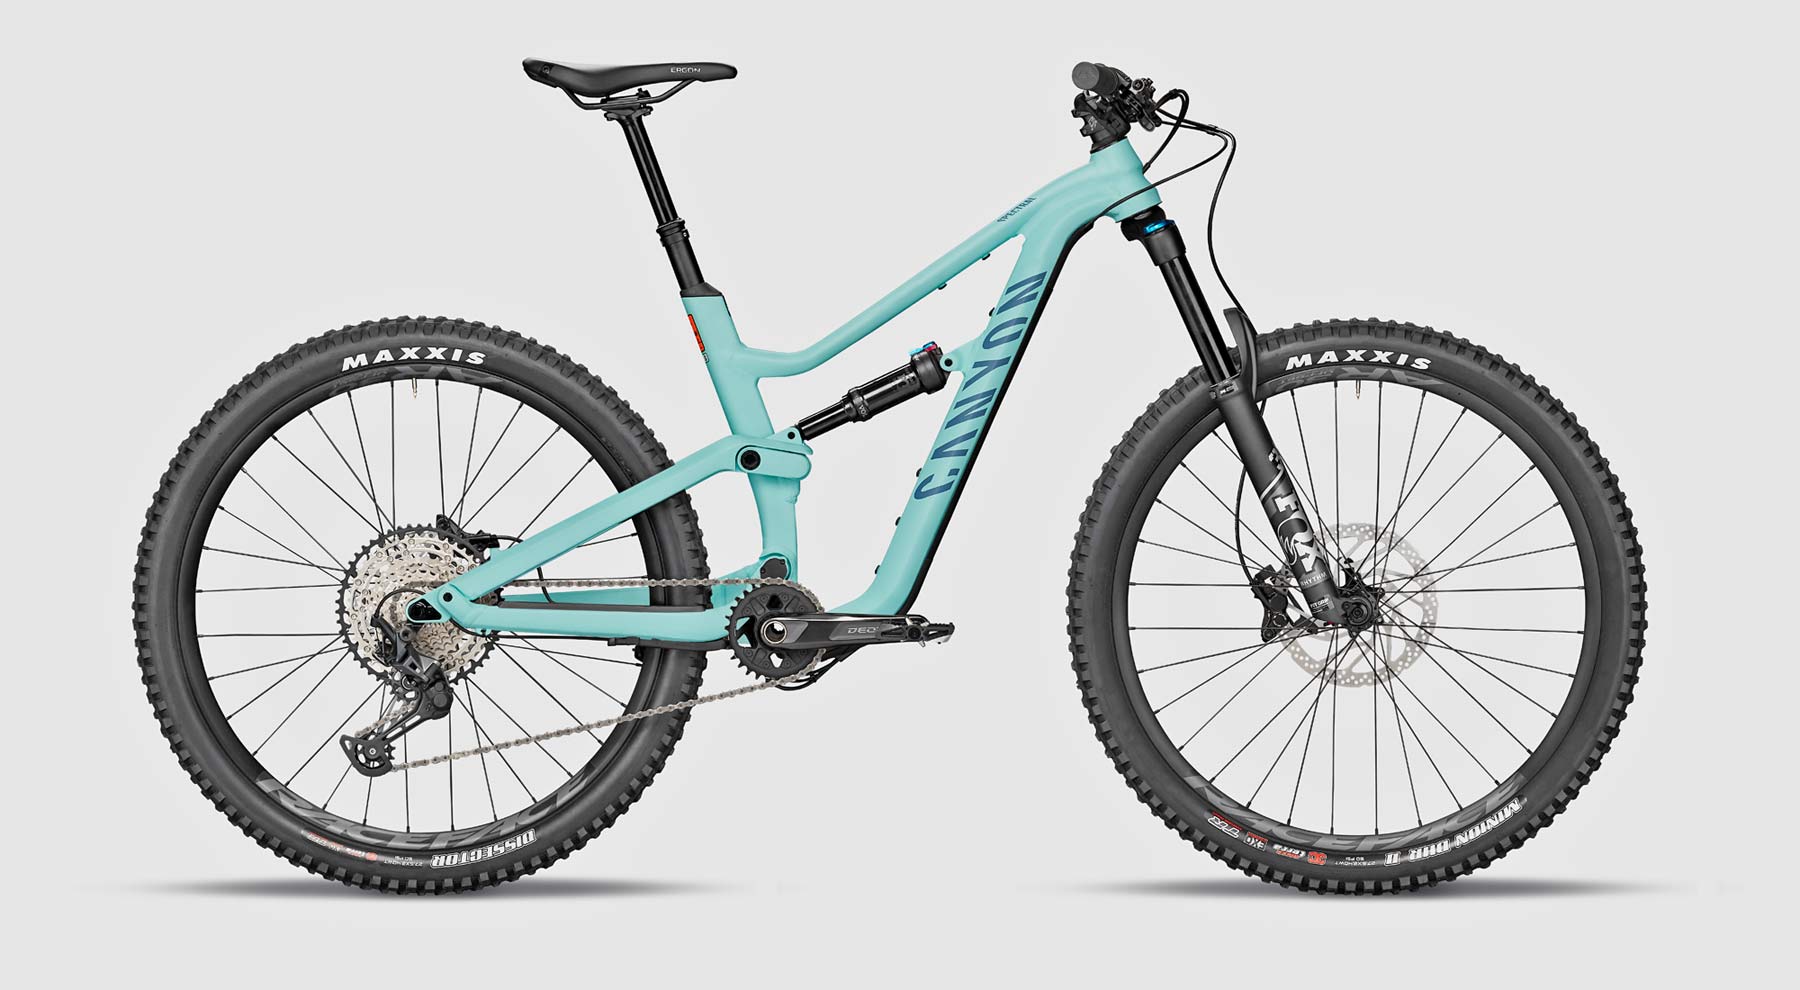 W2021 Canyon Spectral trail bike, 27.5" 150mm all-mountain bike in carbon or alloy, 6 WMN